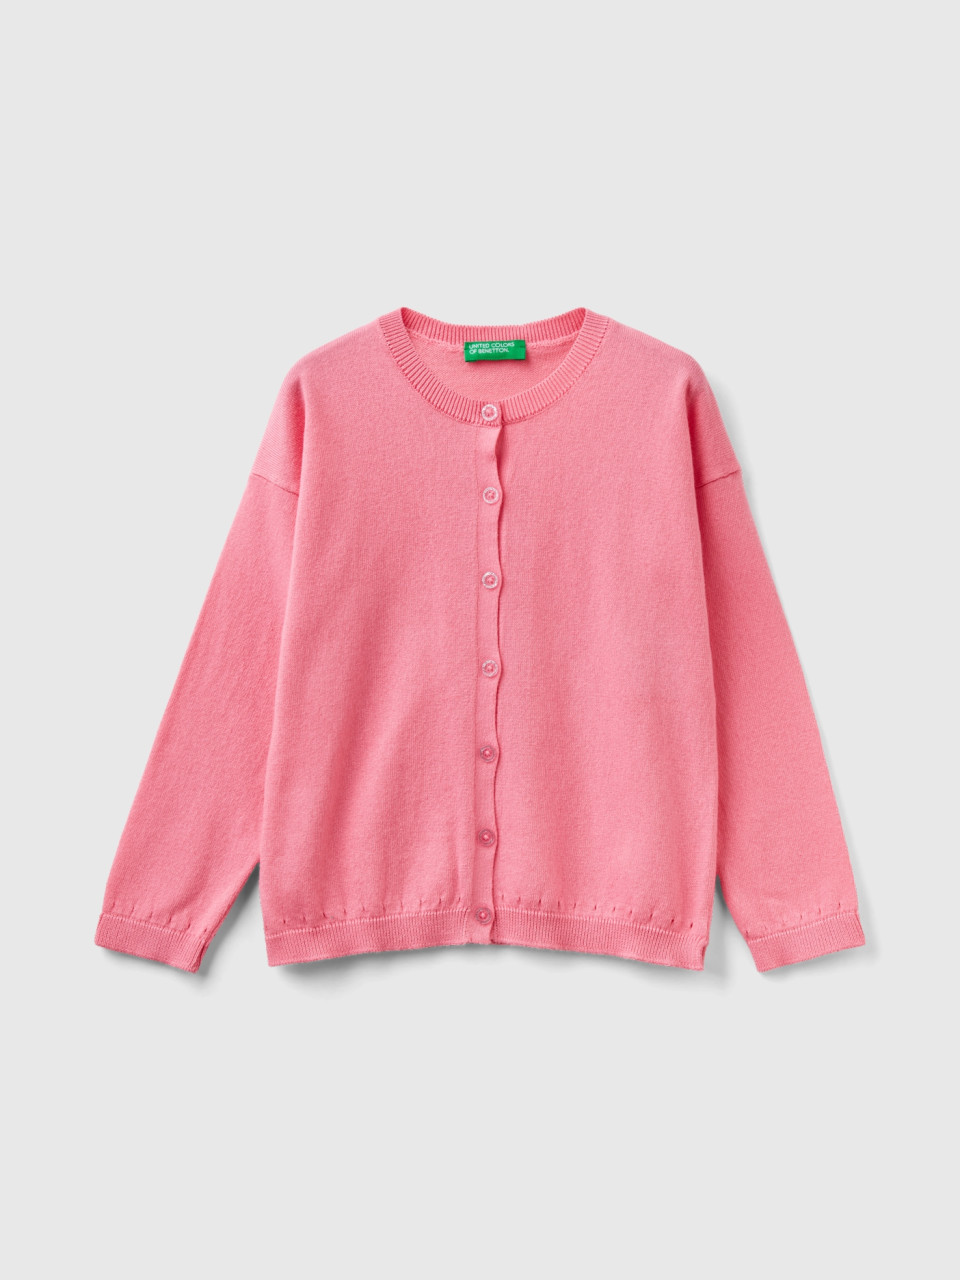 Benetton, Cardigan With Glittery Buttons, Pink, Kids